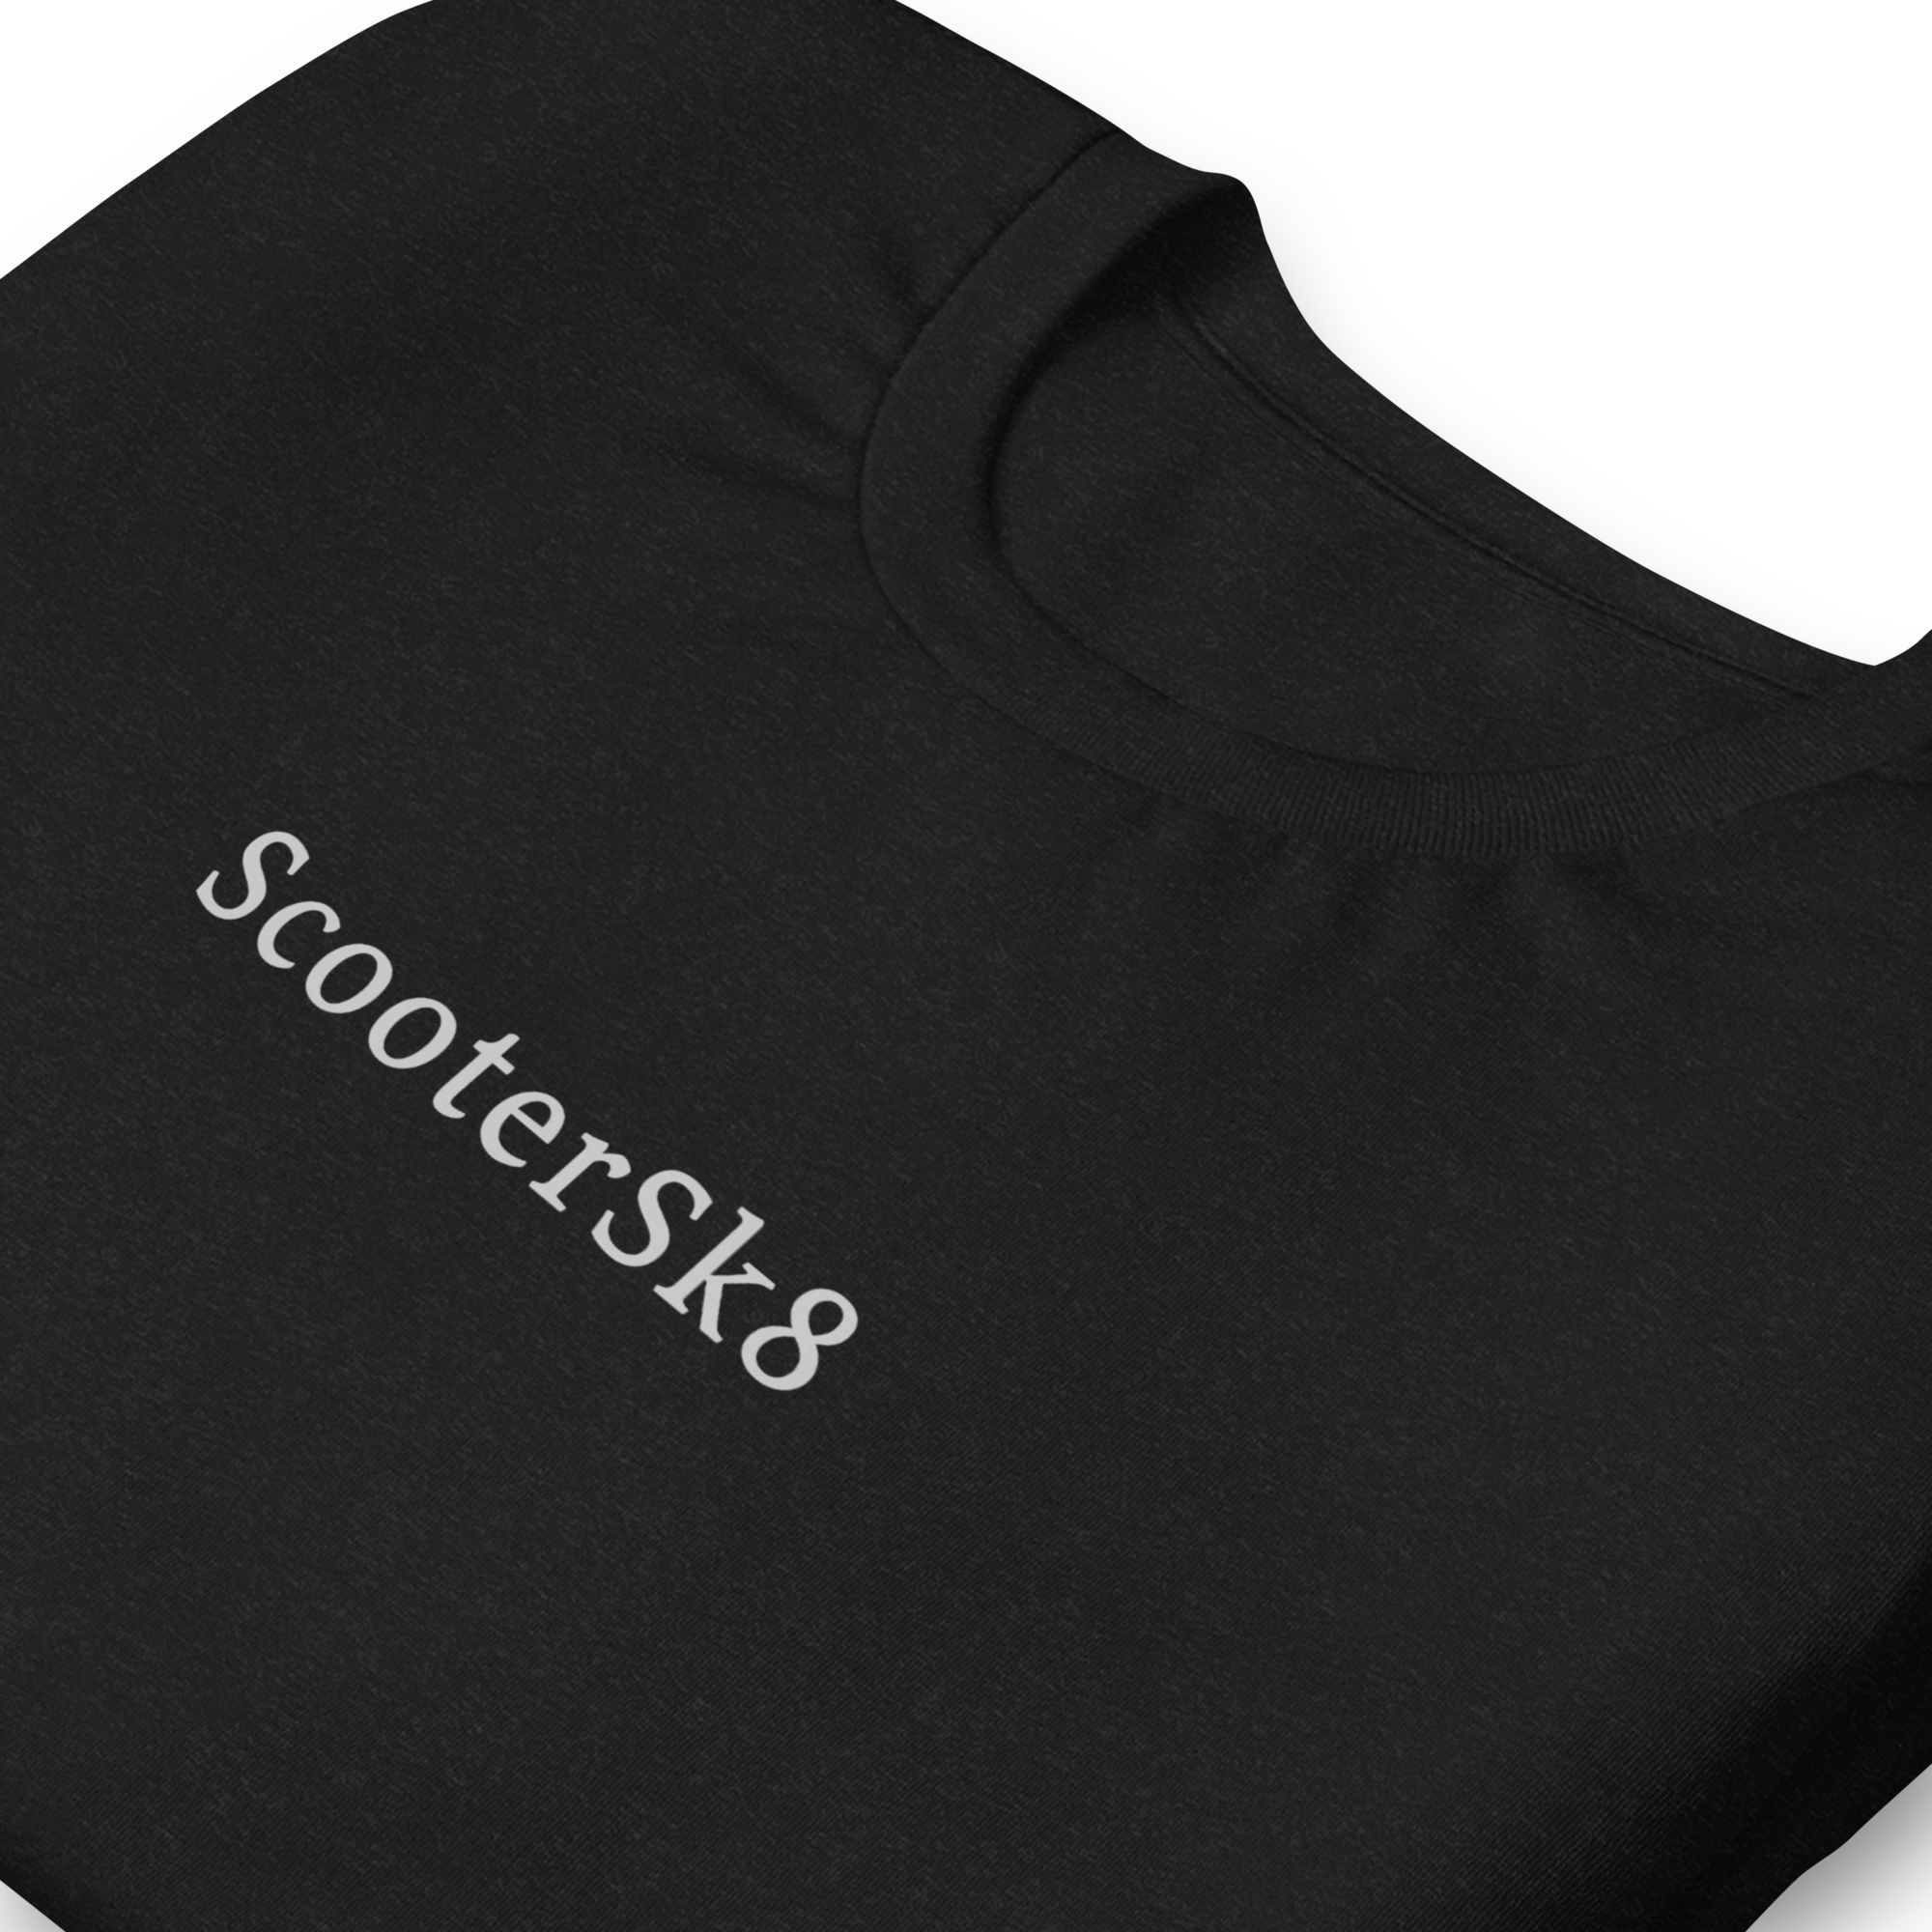 Scootersk8 t-shirt